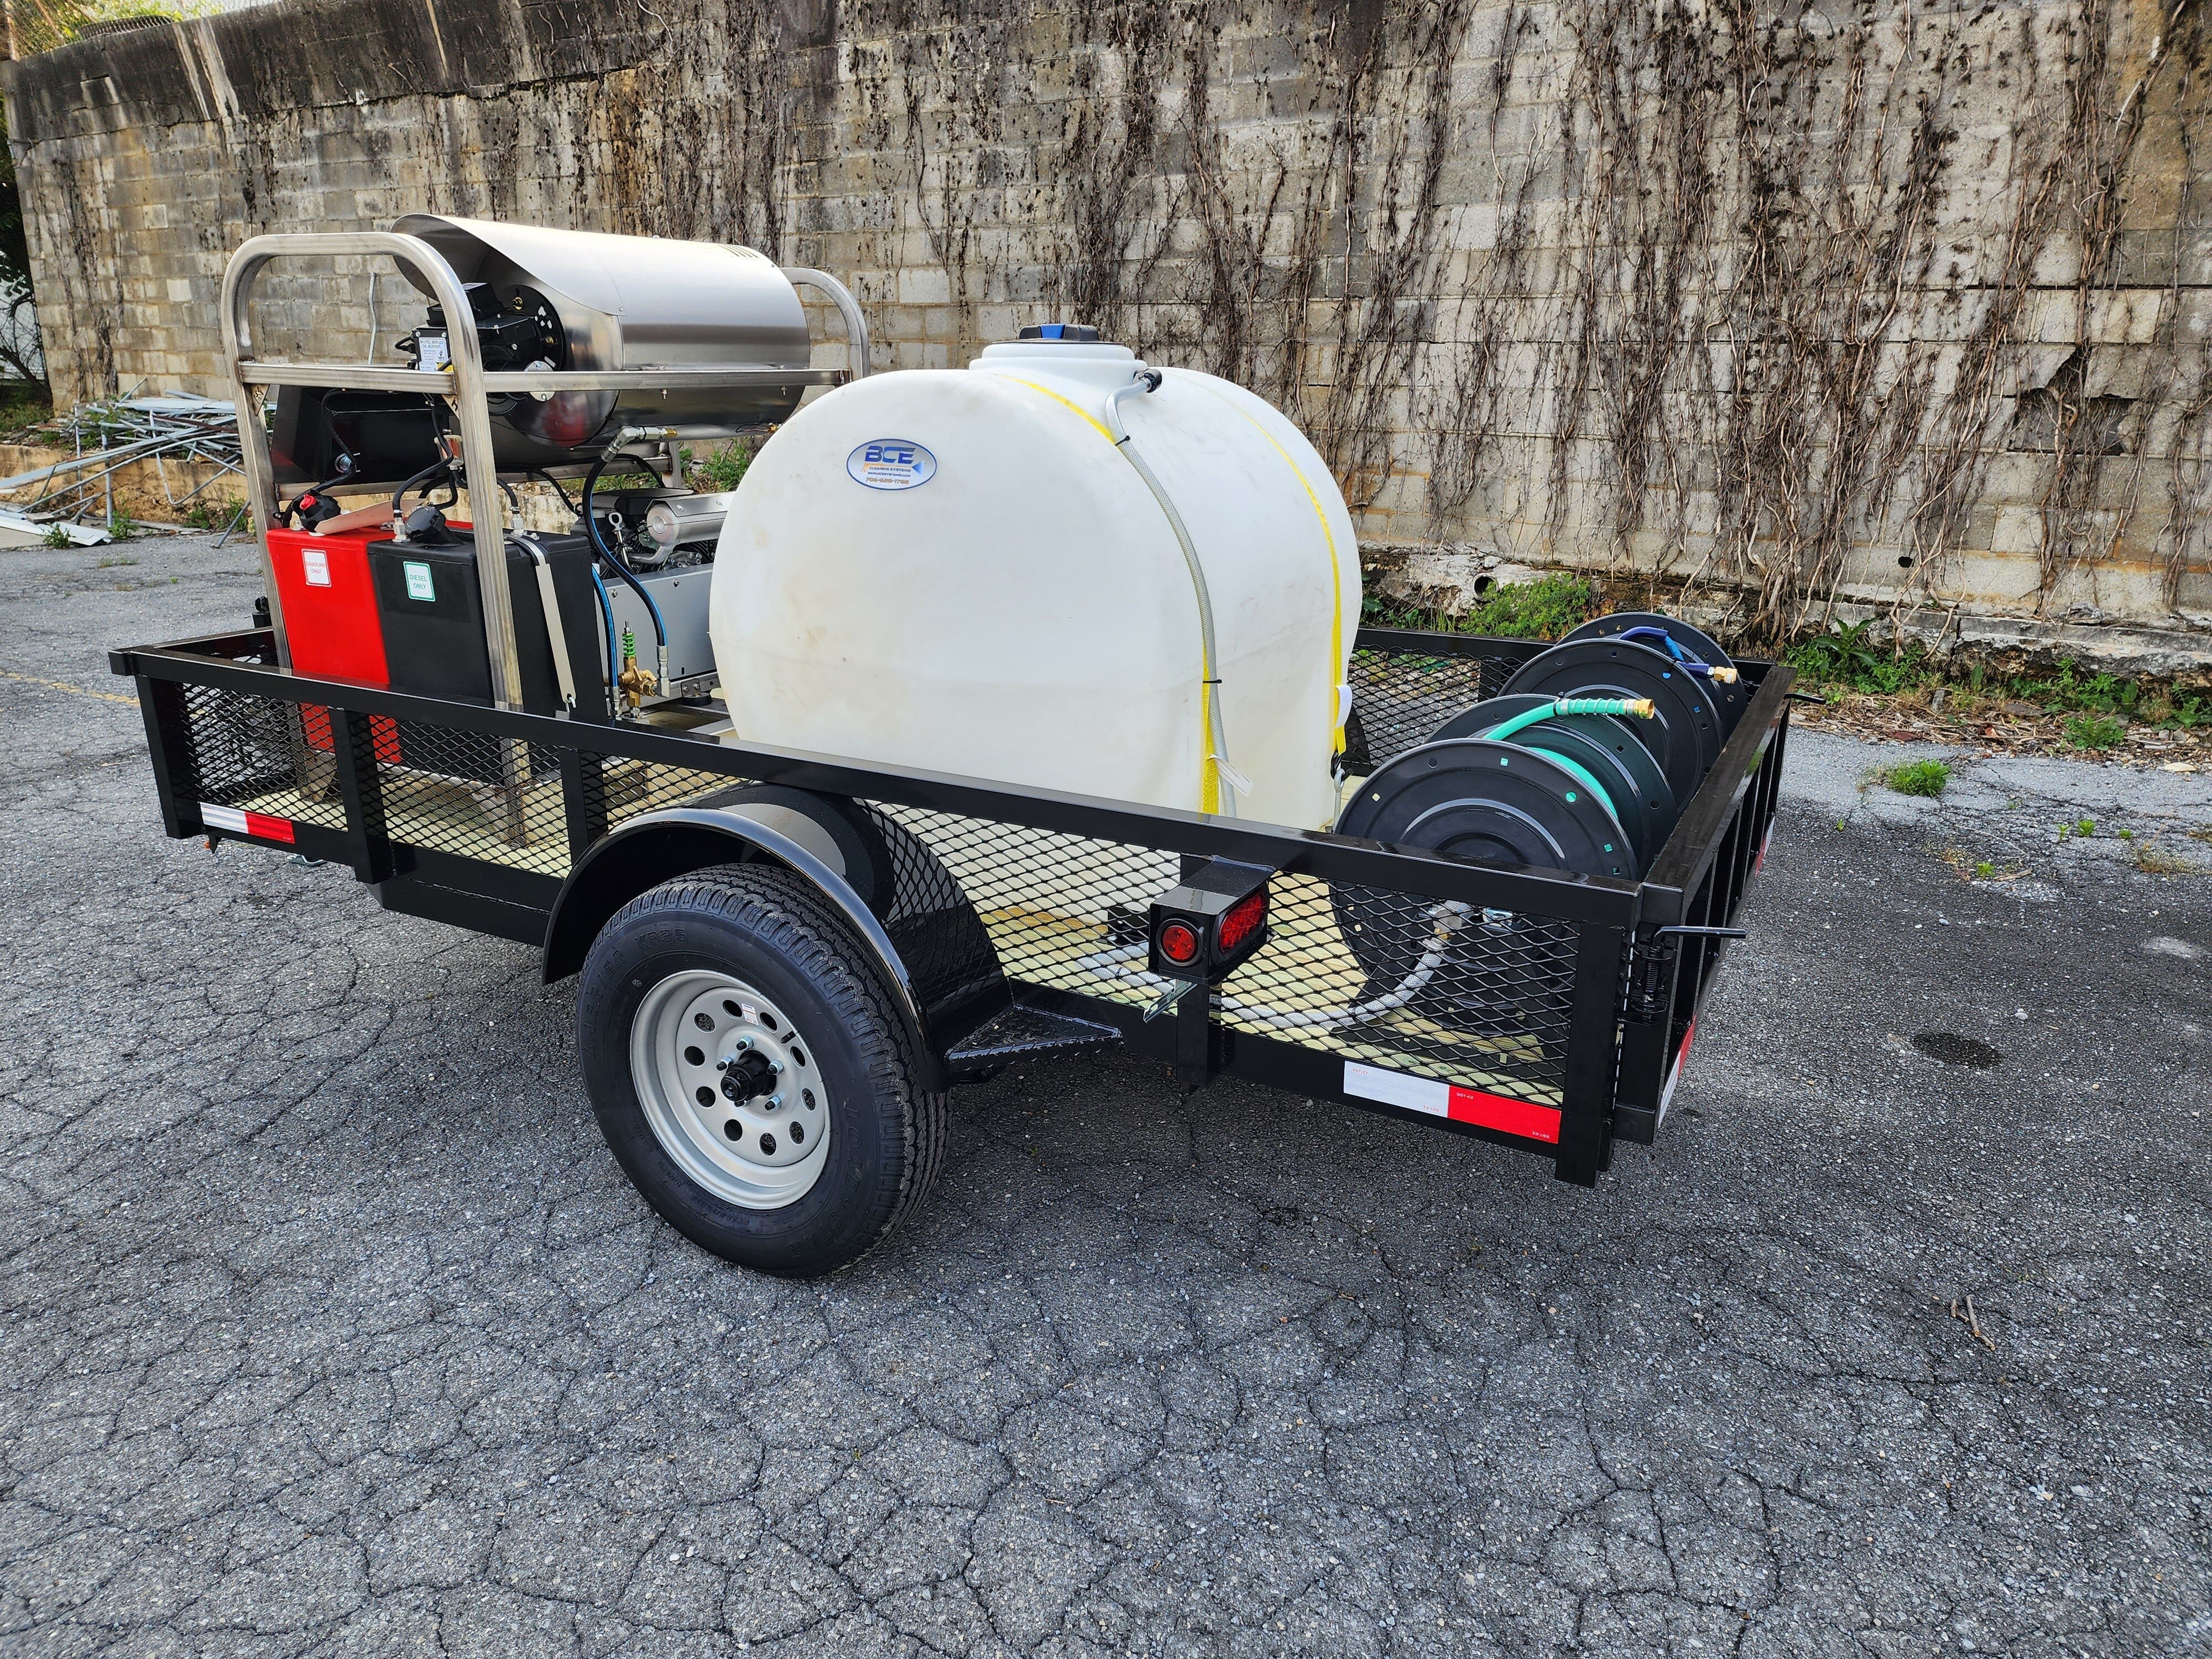 Hydro Max -8gpm at 4000psi Hot Water Trailer Package -Single Axle BCE Cleaning Systems 